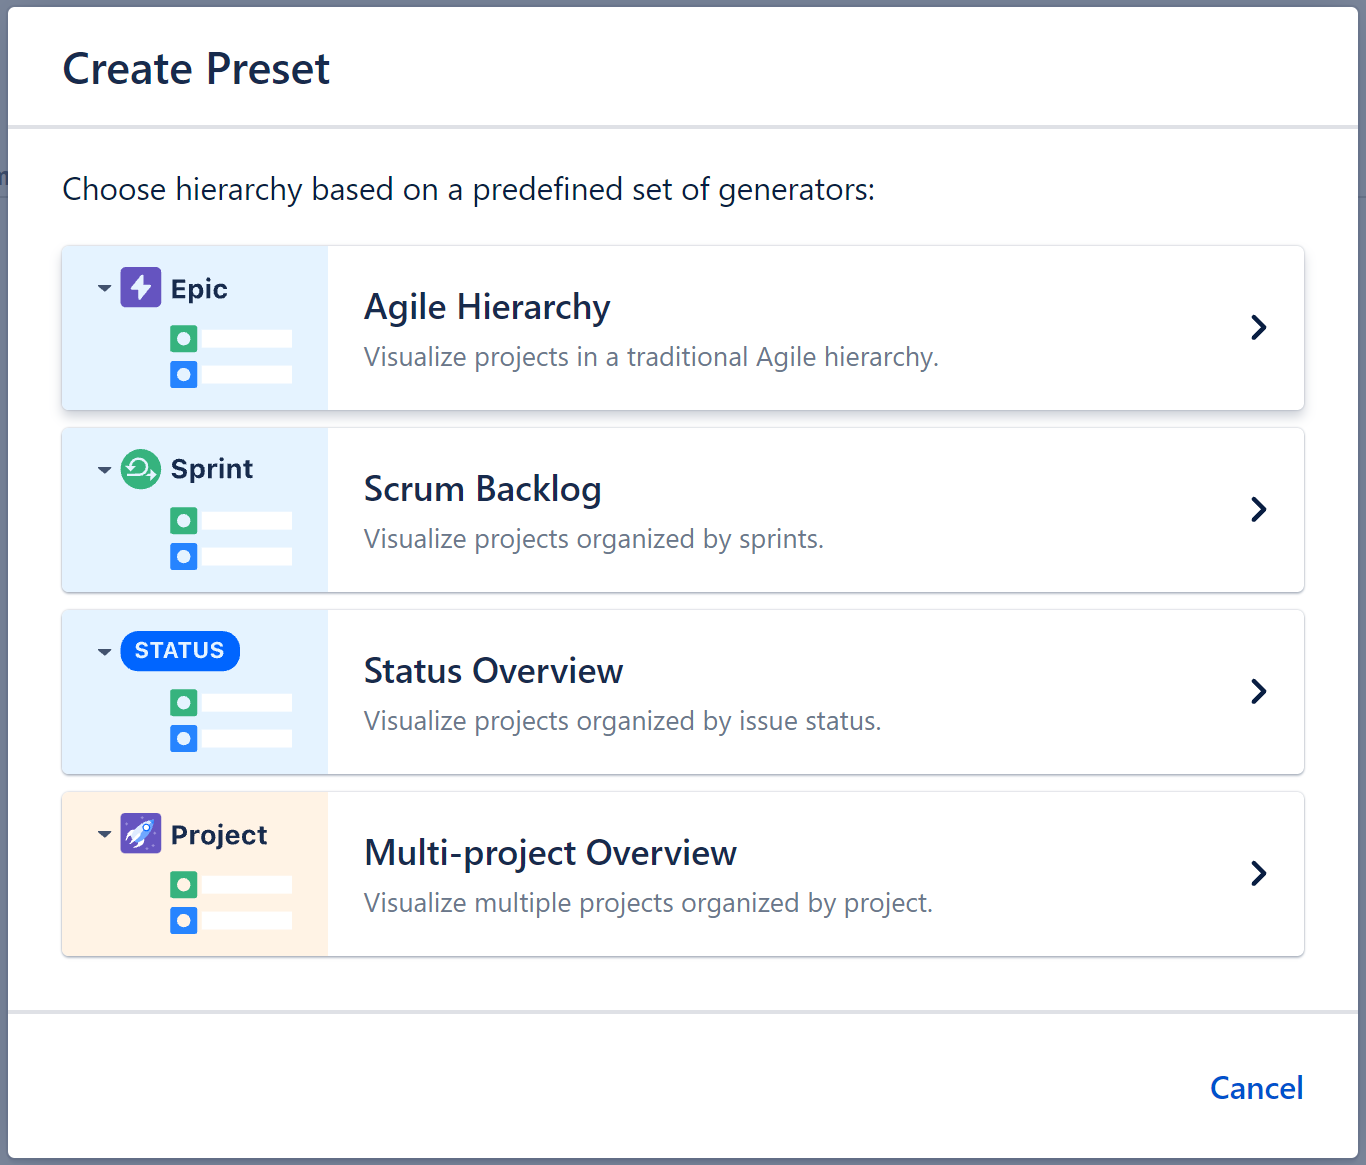 Add a multi-project overview preset